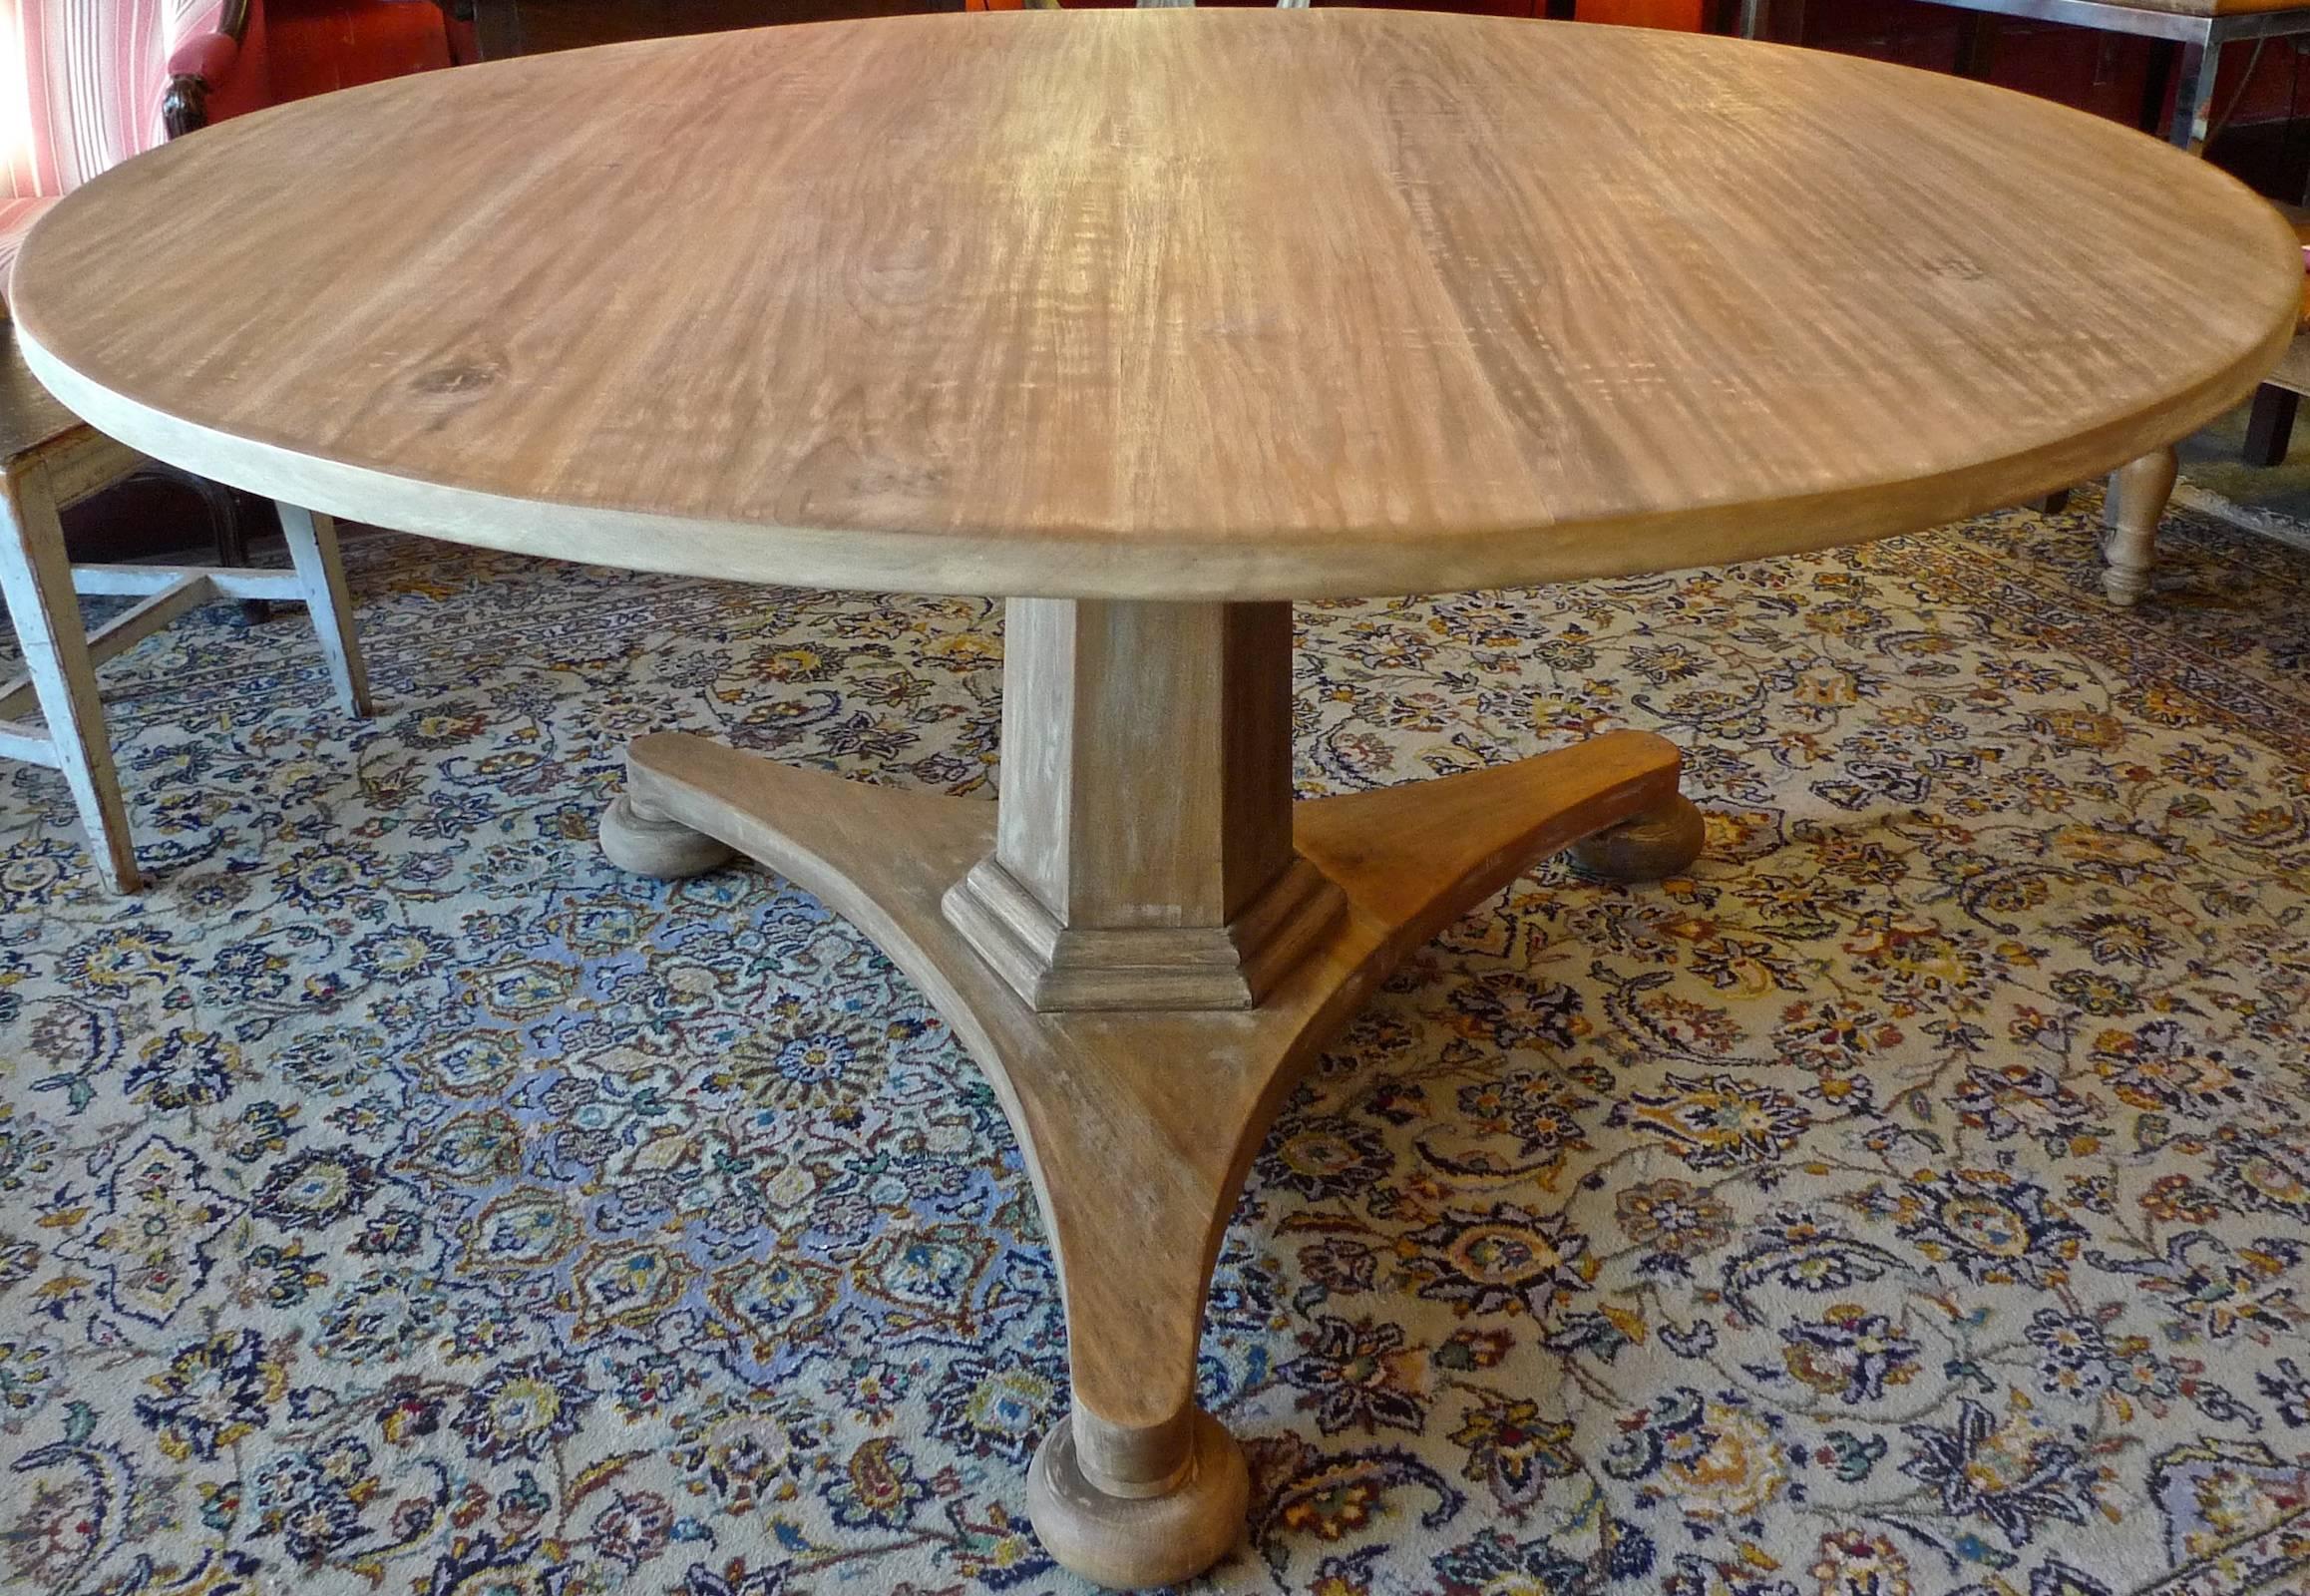 Swedish style contemporary alder-wood round pedestal table. Made to customer’s specifications.